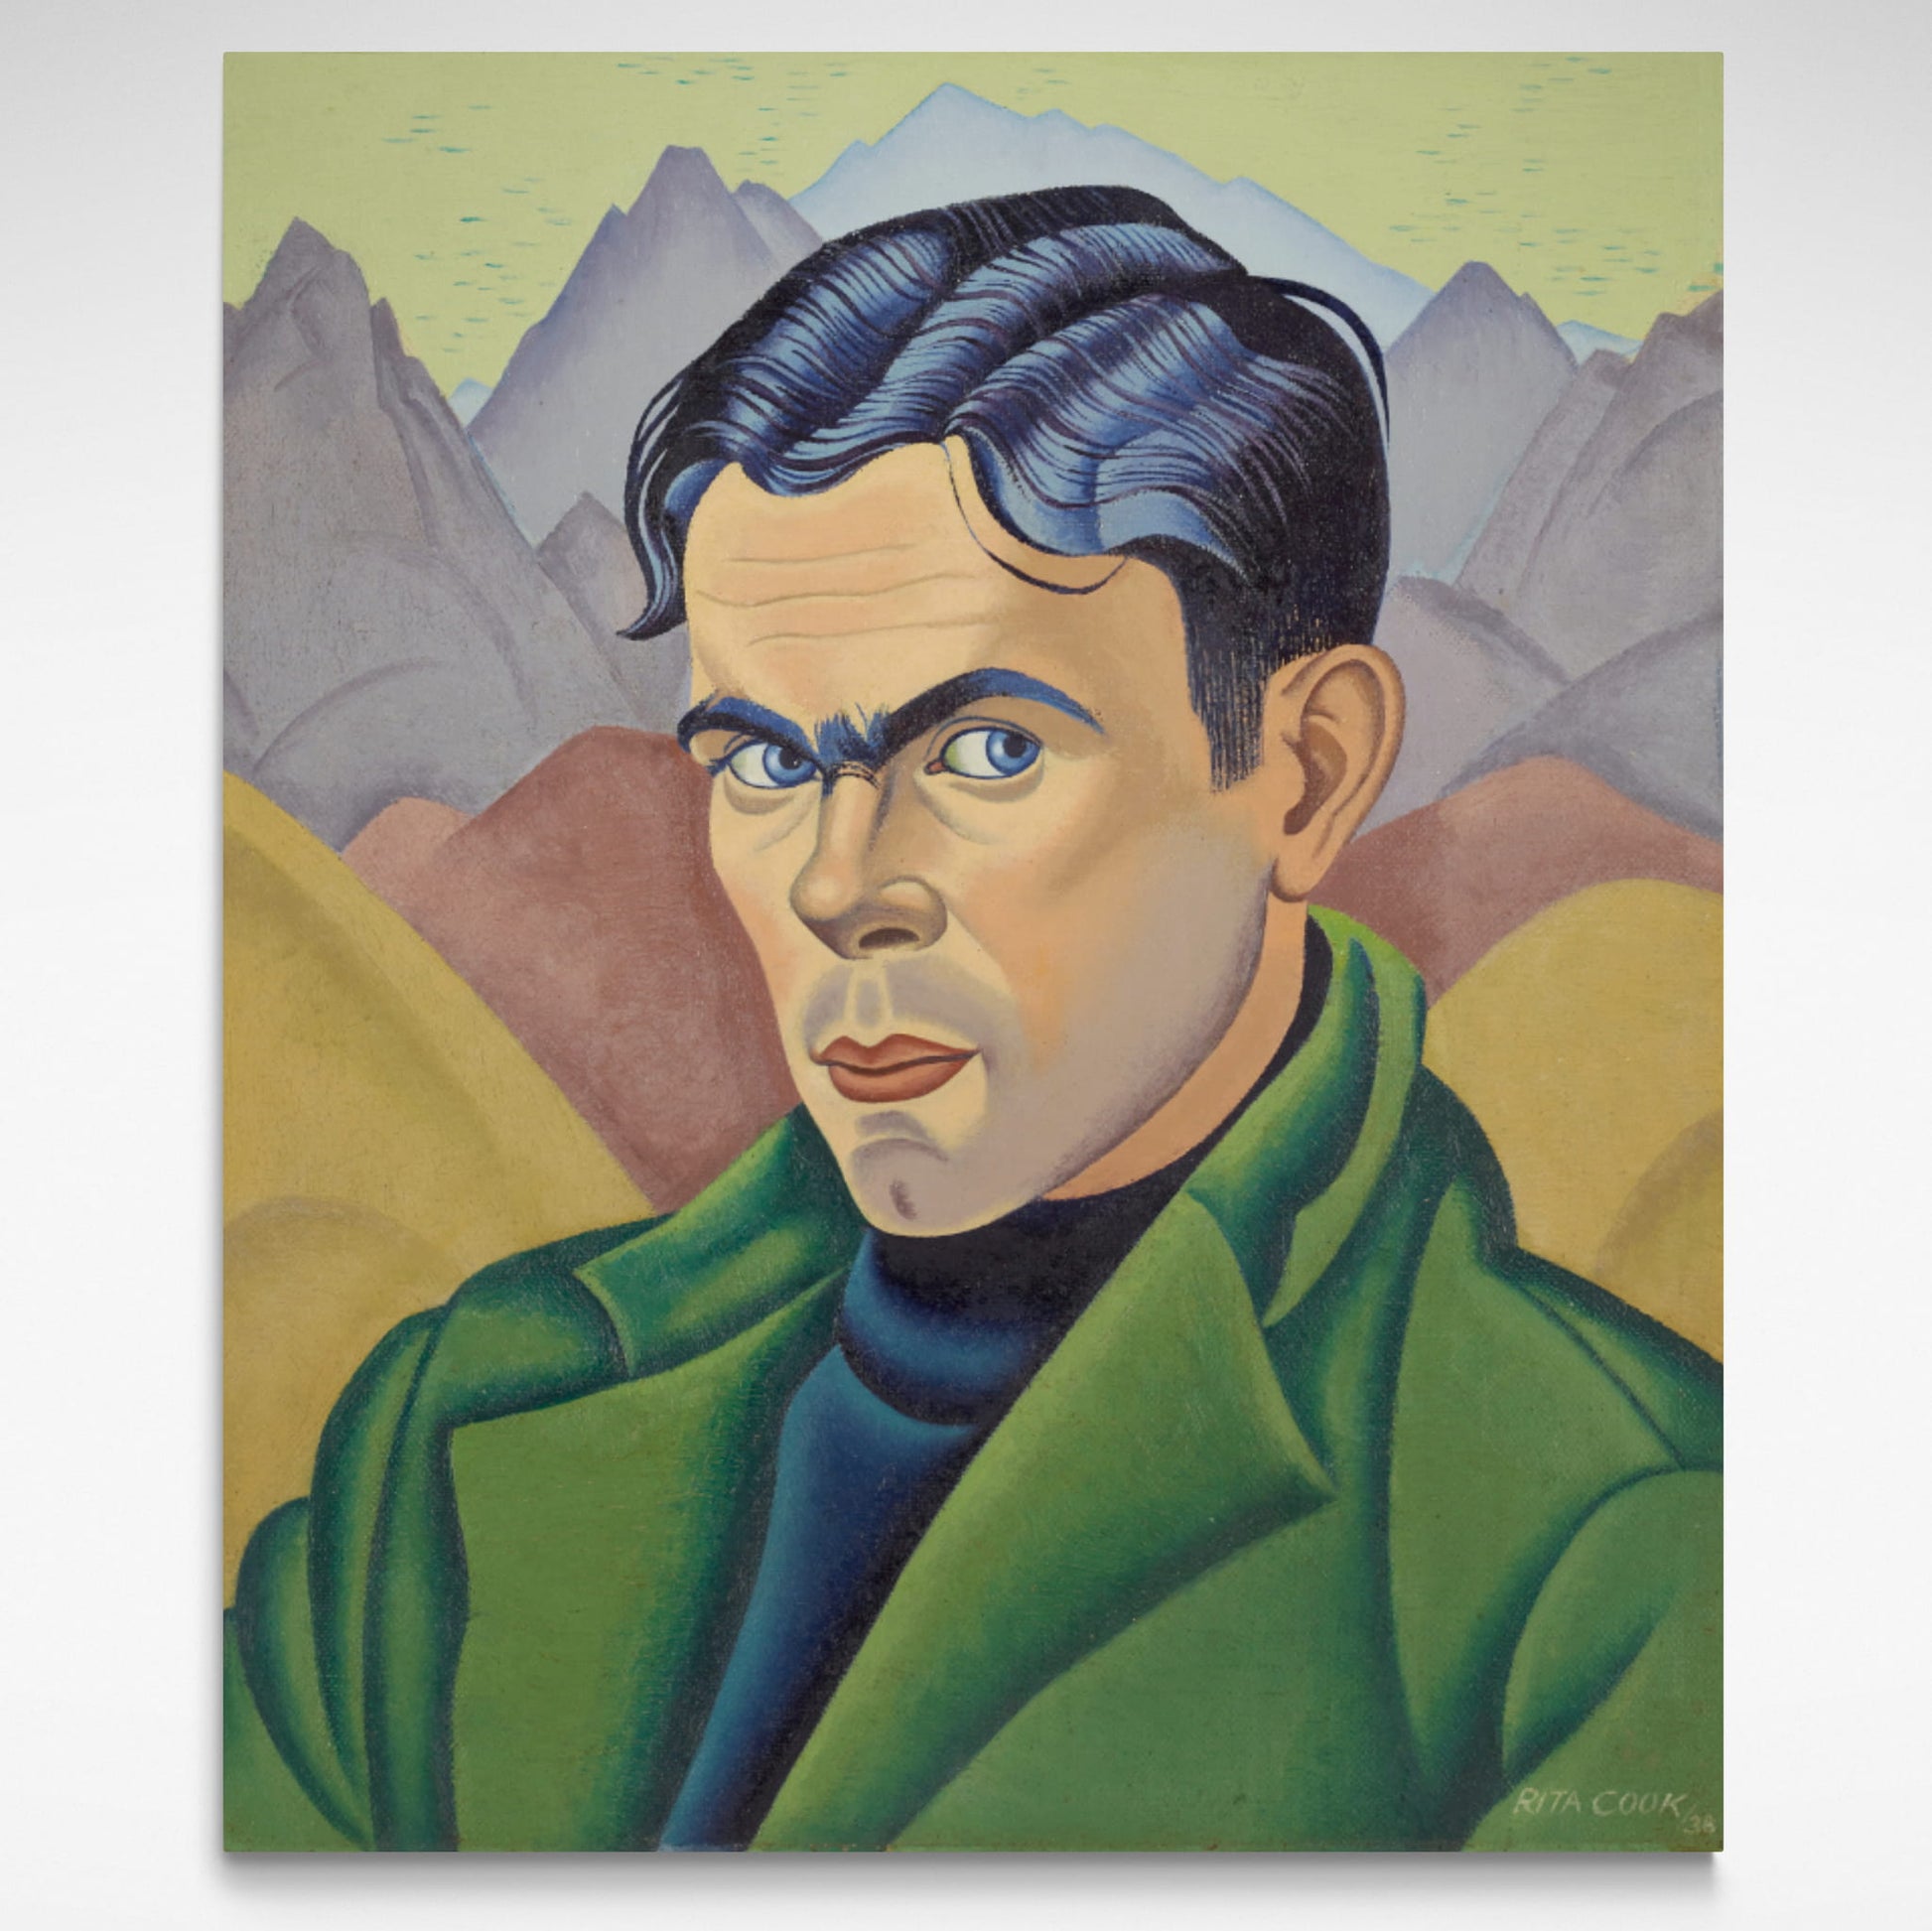 Portrait of a man in a green coat against a background of mountains.